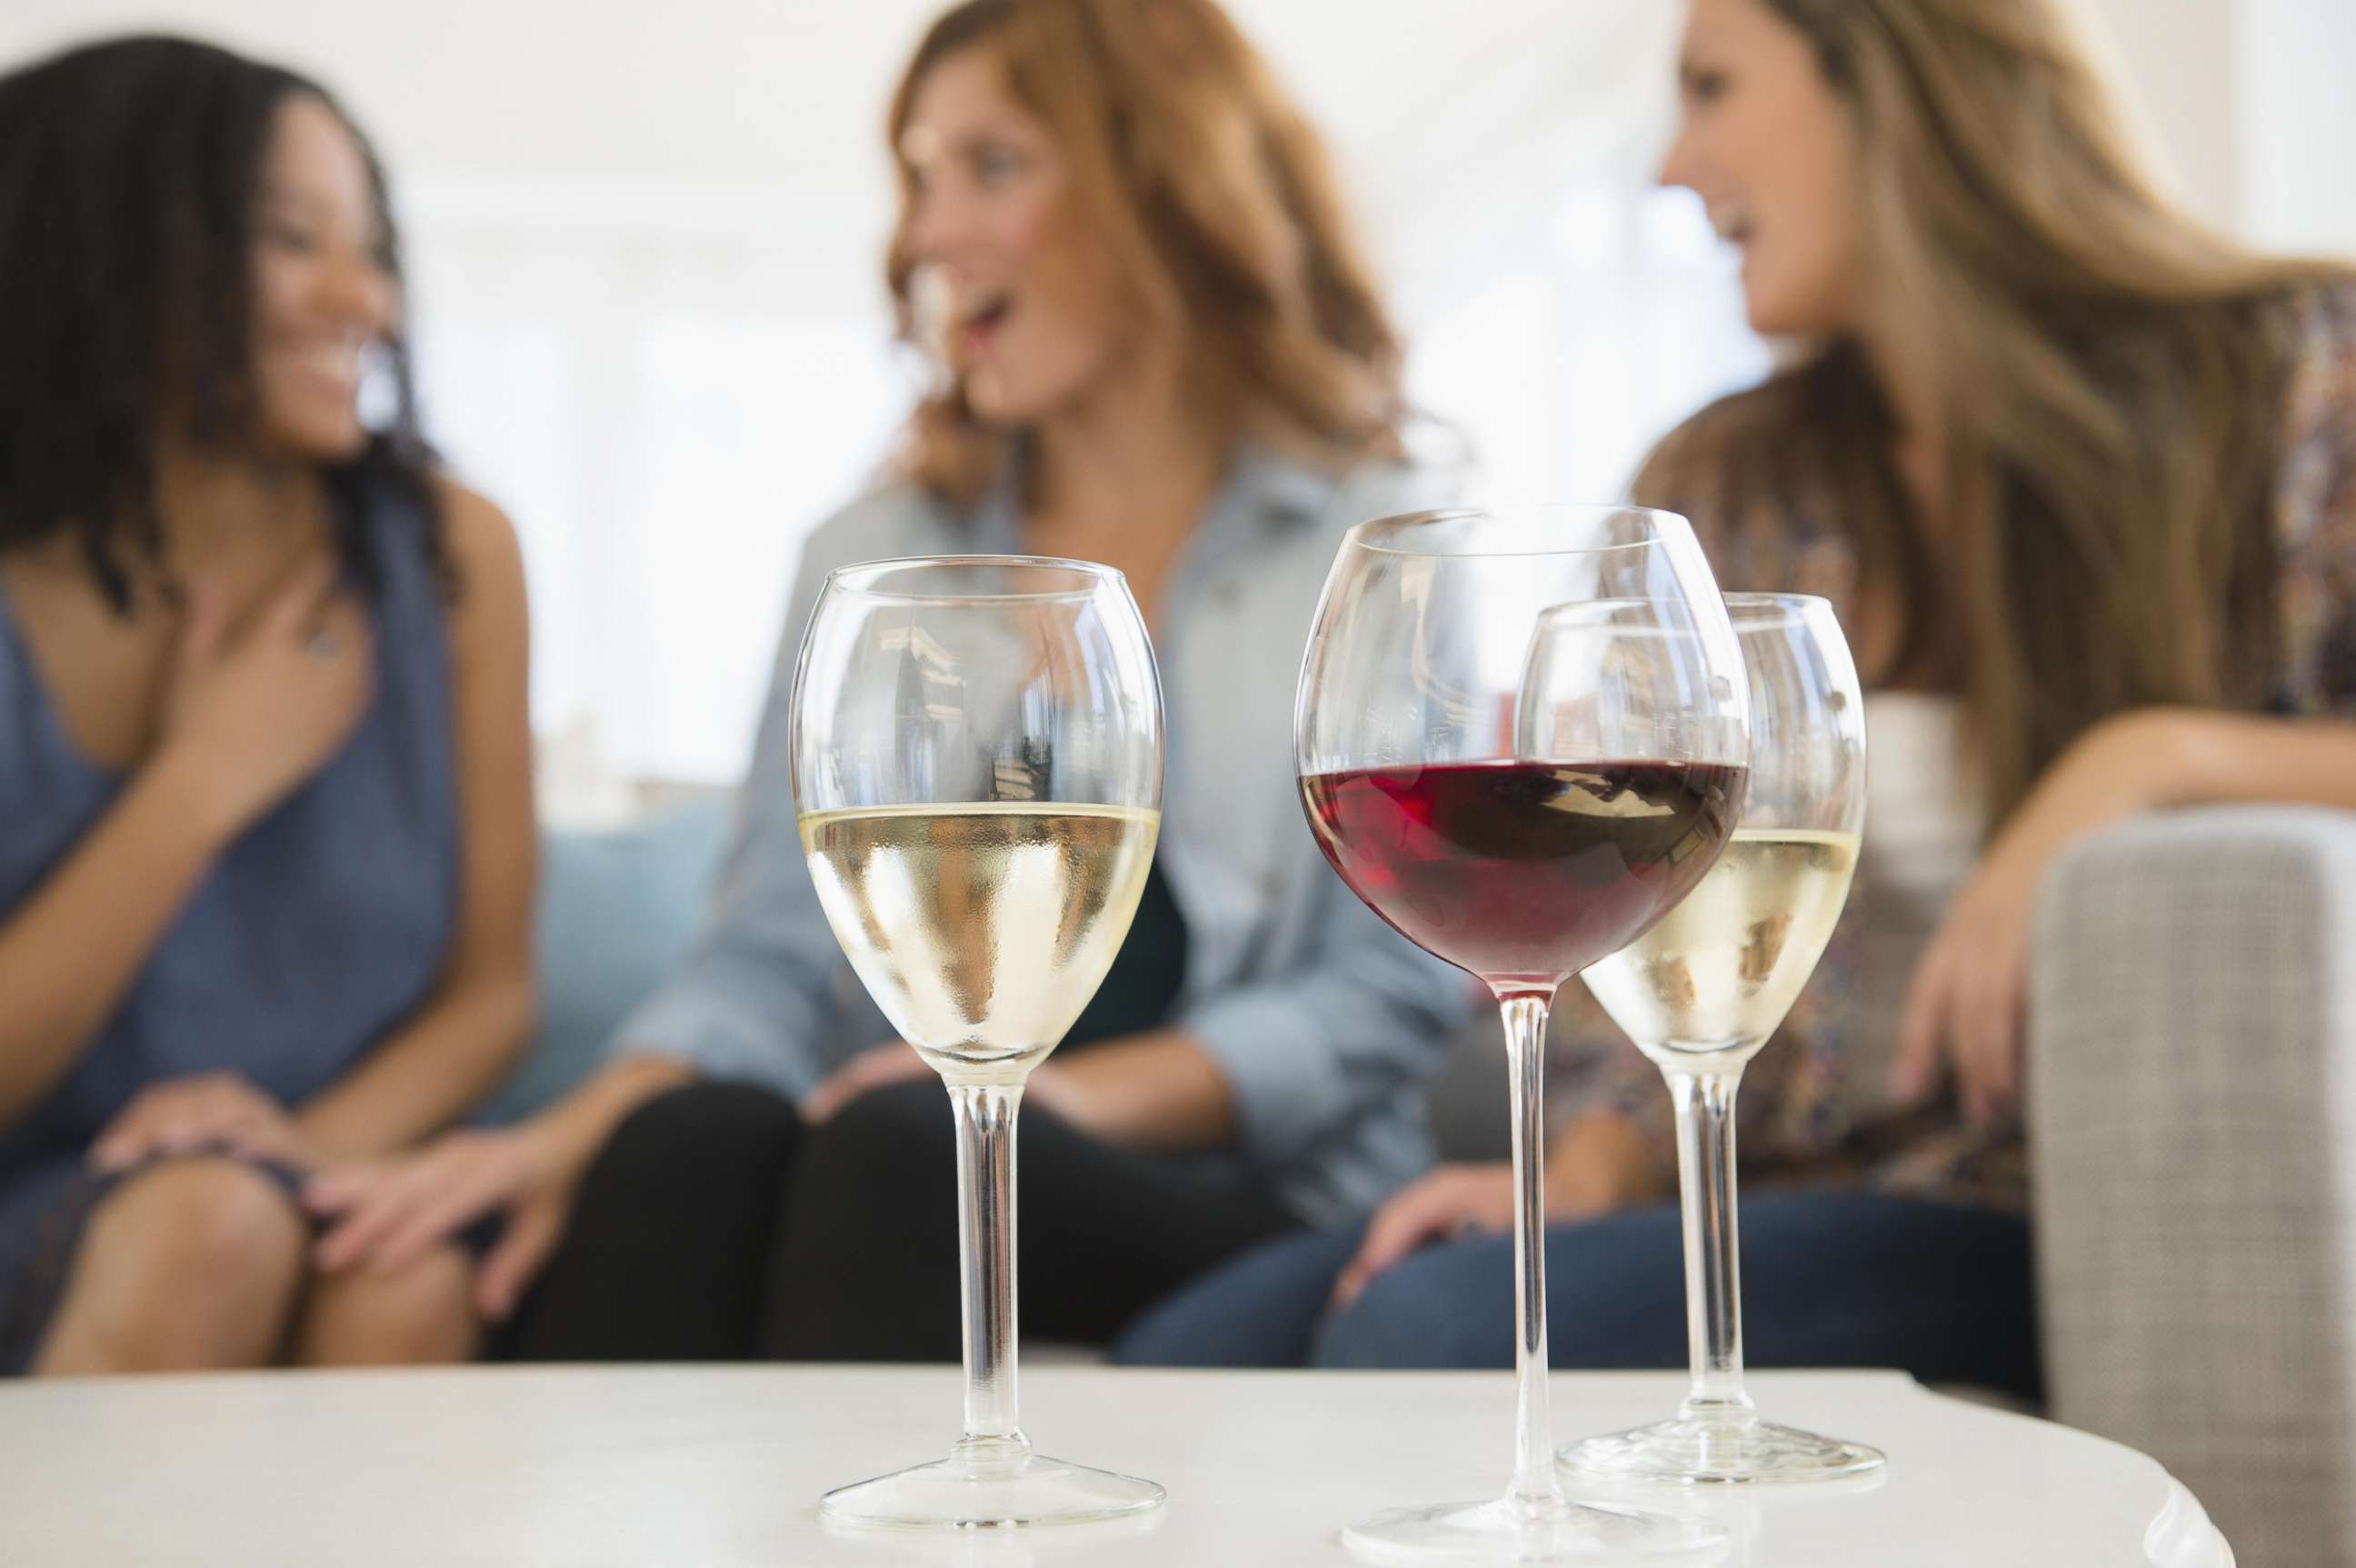 PHOTO: Women are pictured with wine glasses in an undated stock photo.